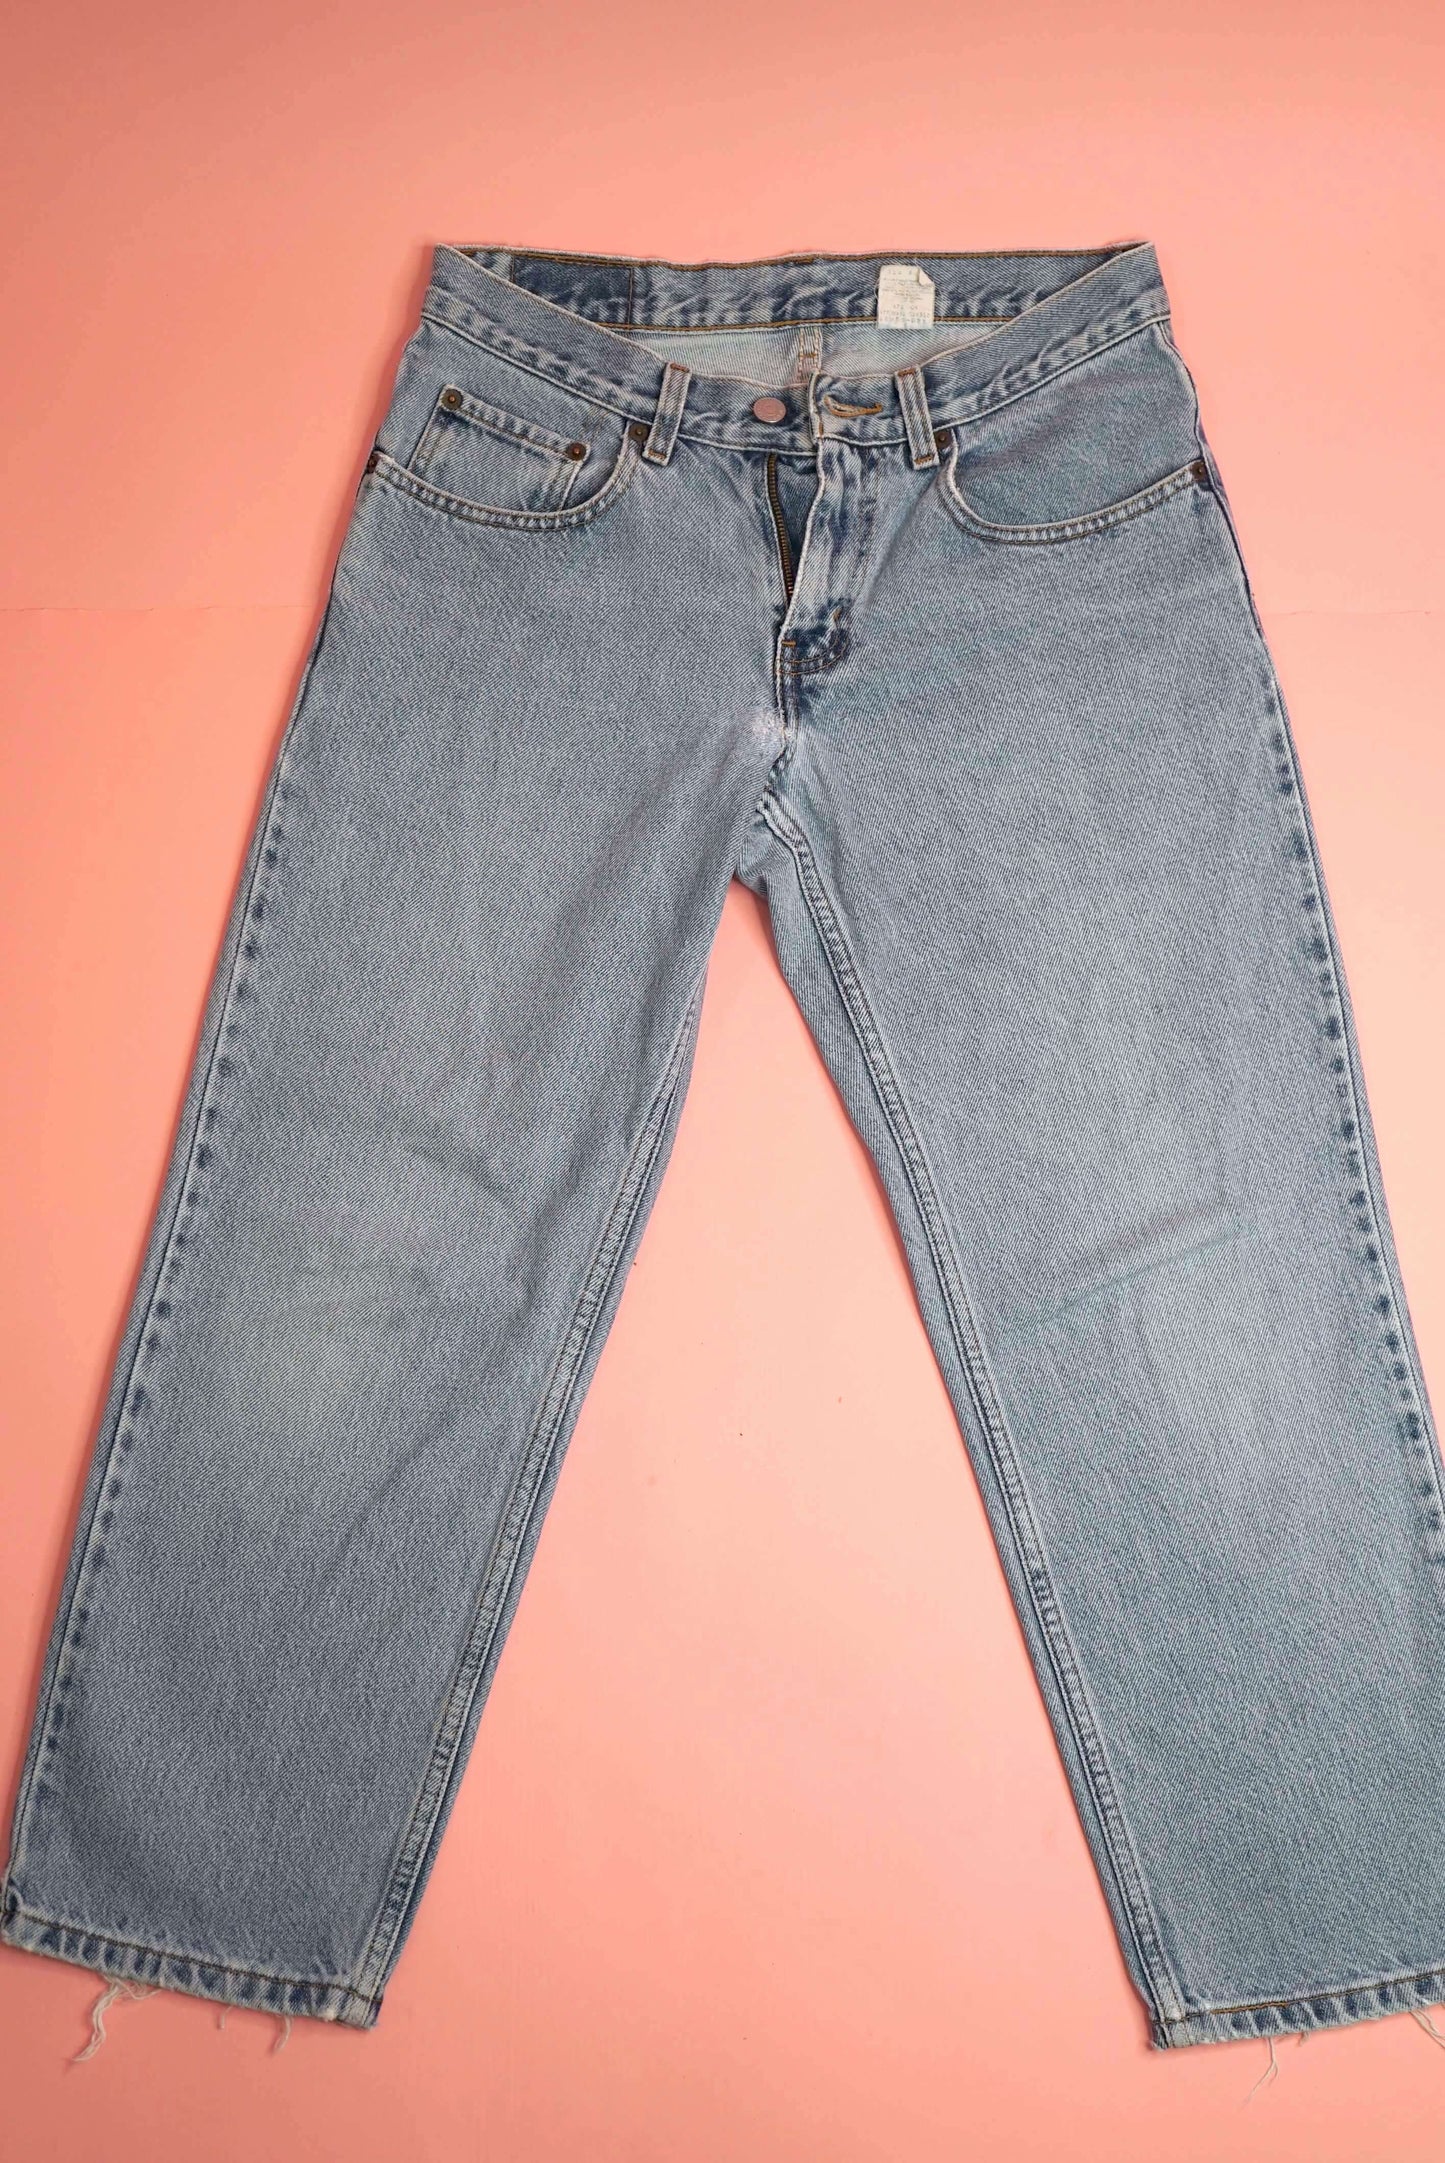 Vintage Levis 550 Husky Jeans W29-30 Ankle Length Relaxed Fit Light Blue